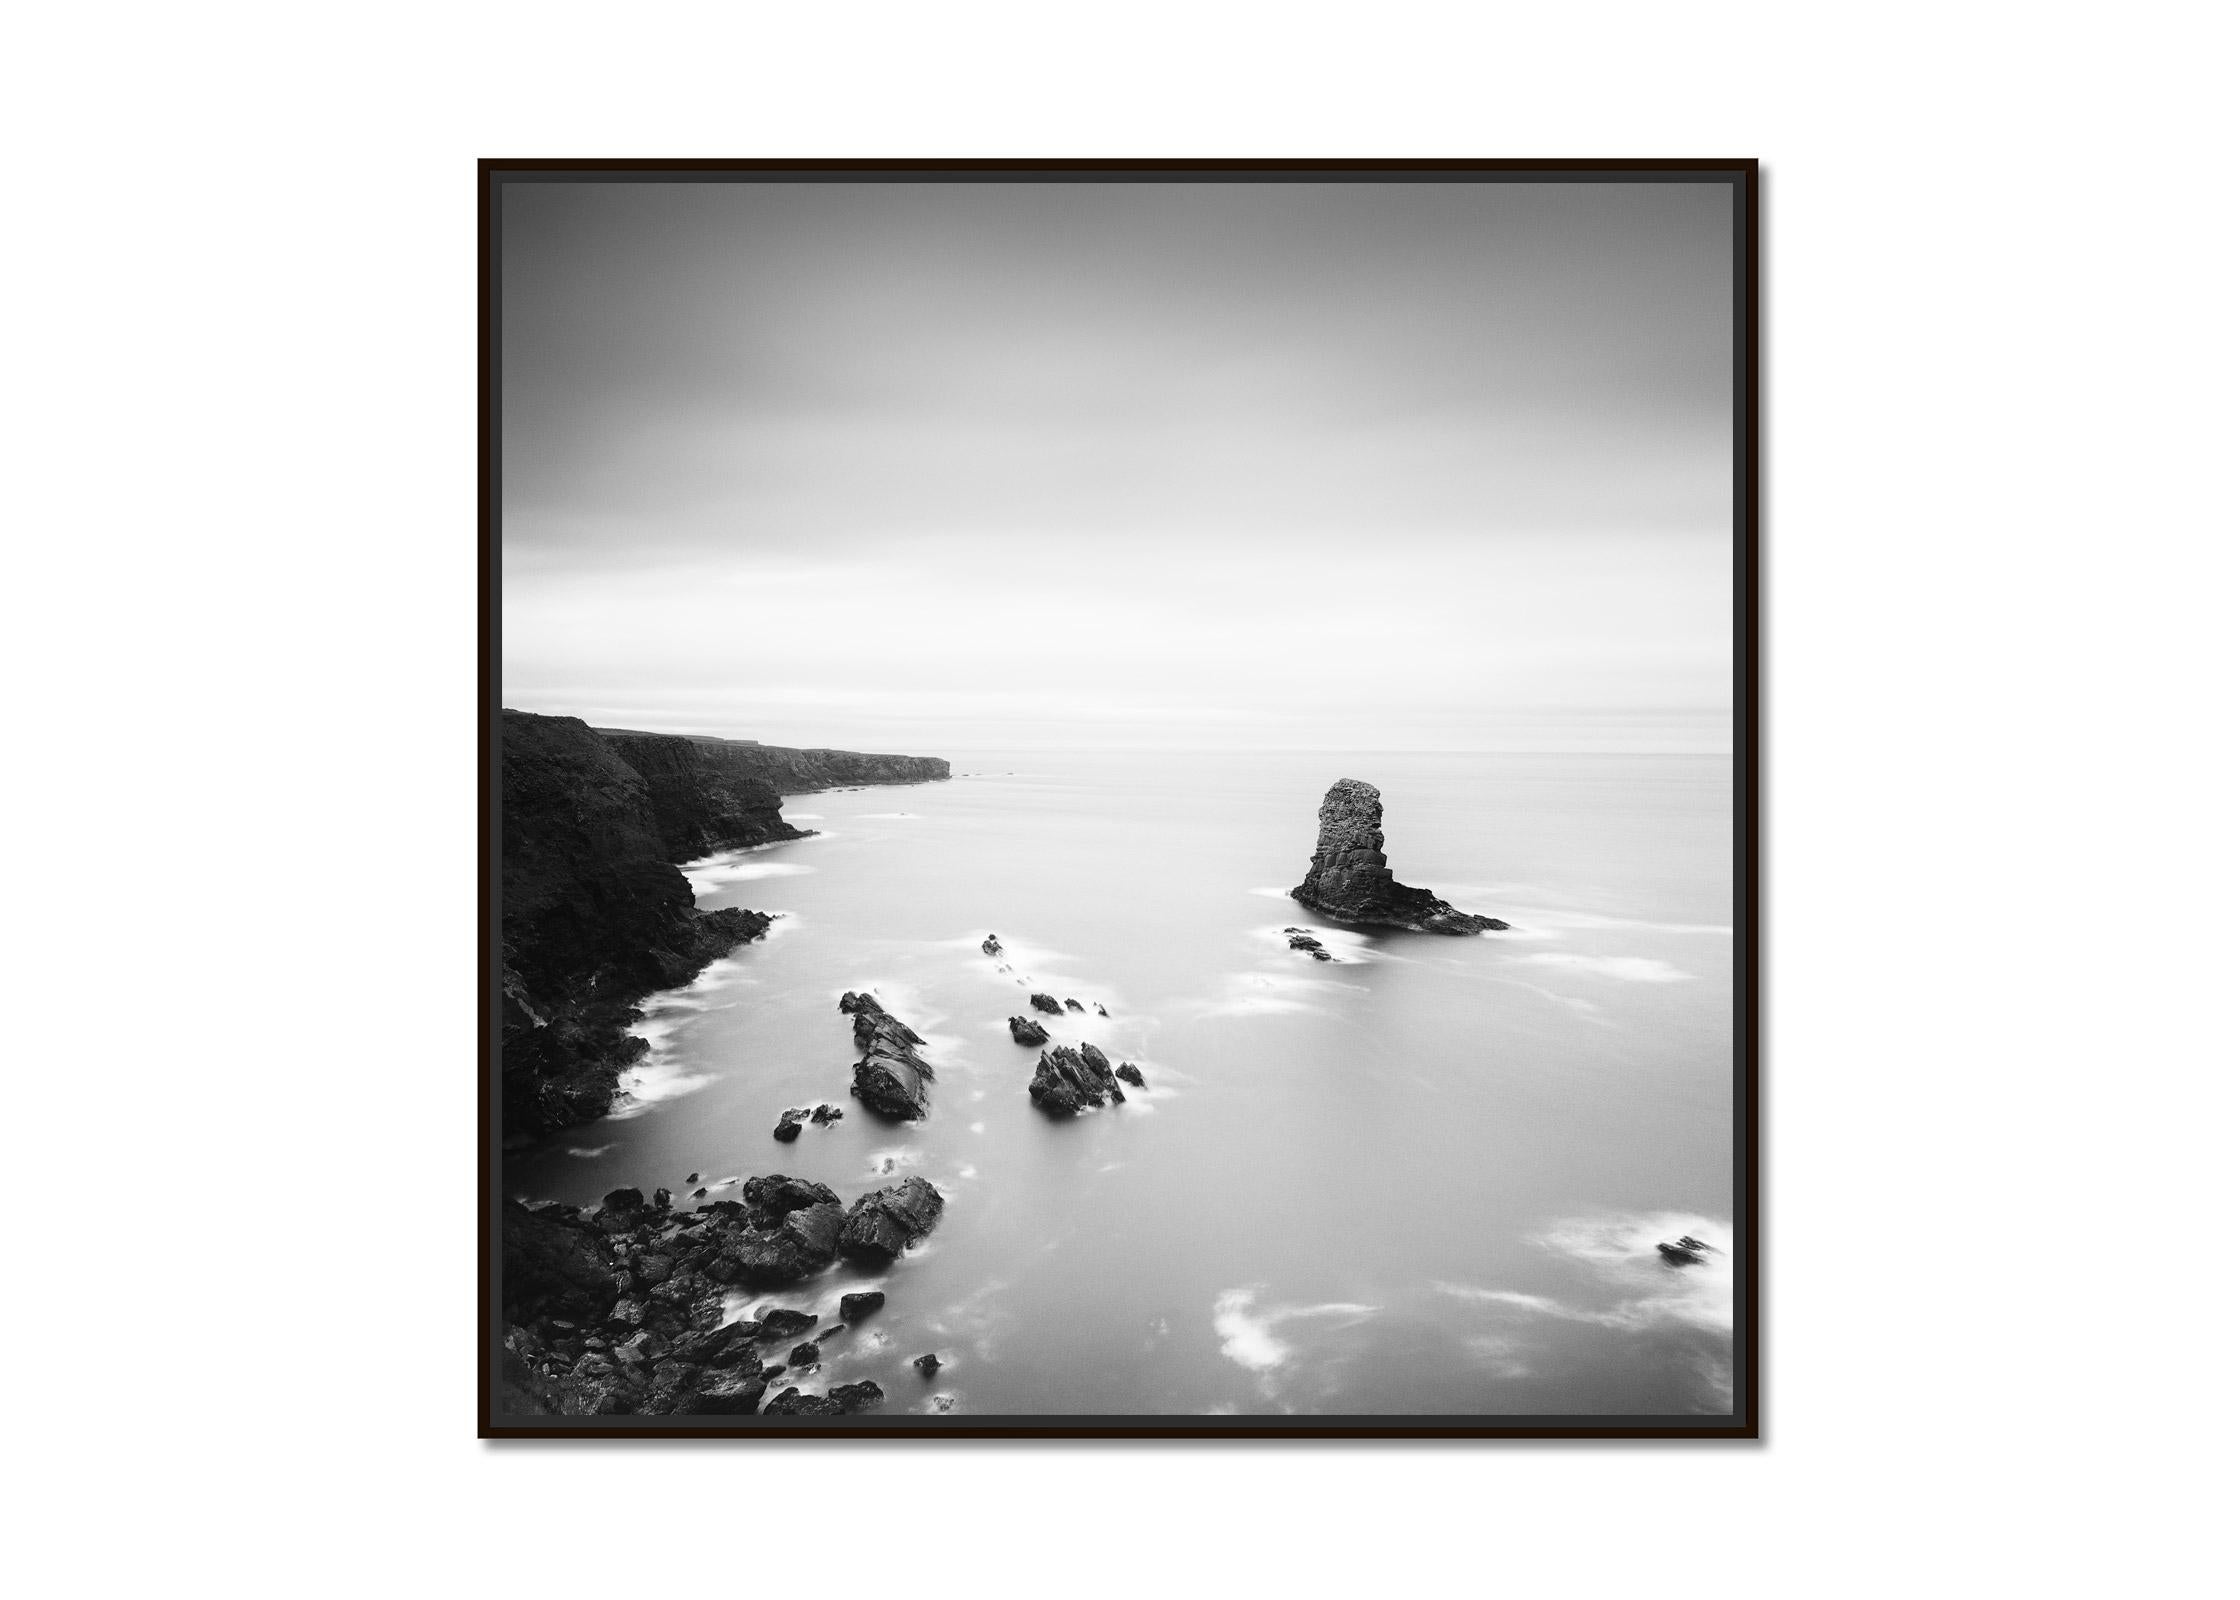 Irish Coast, Cliffs, Shoreline, Ireland, black and white waterscape photography - Photograph by Gerald Berghammer